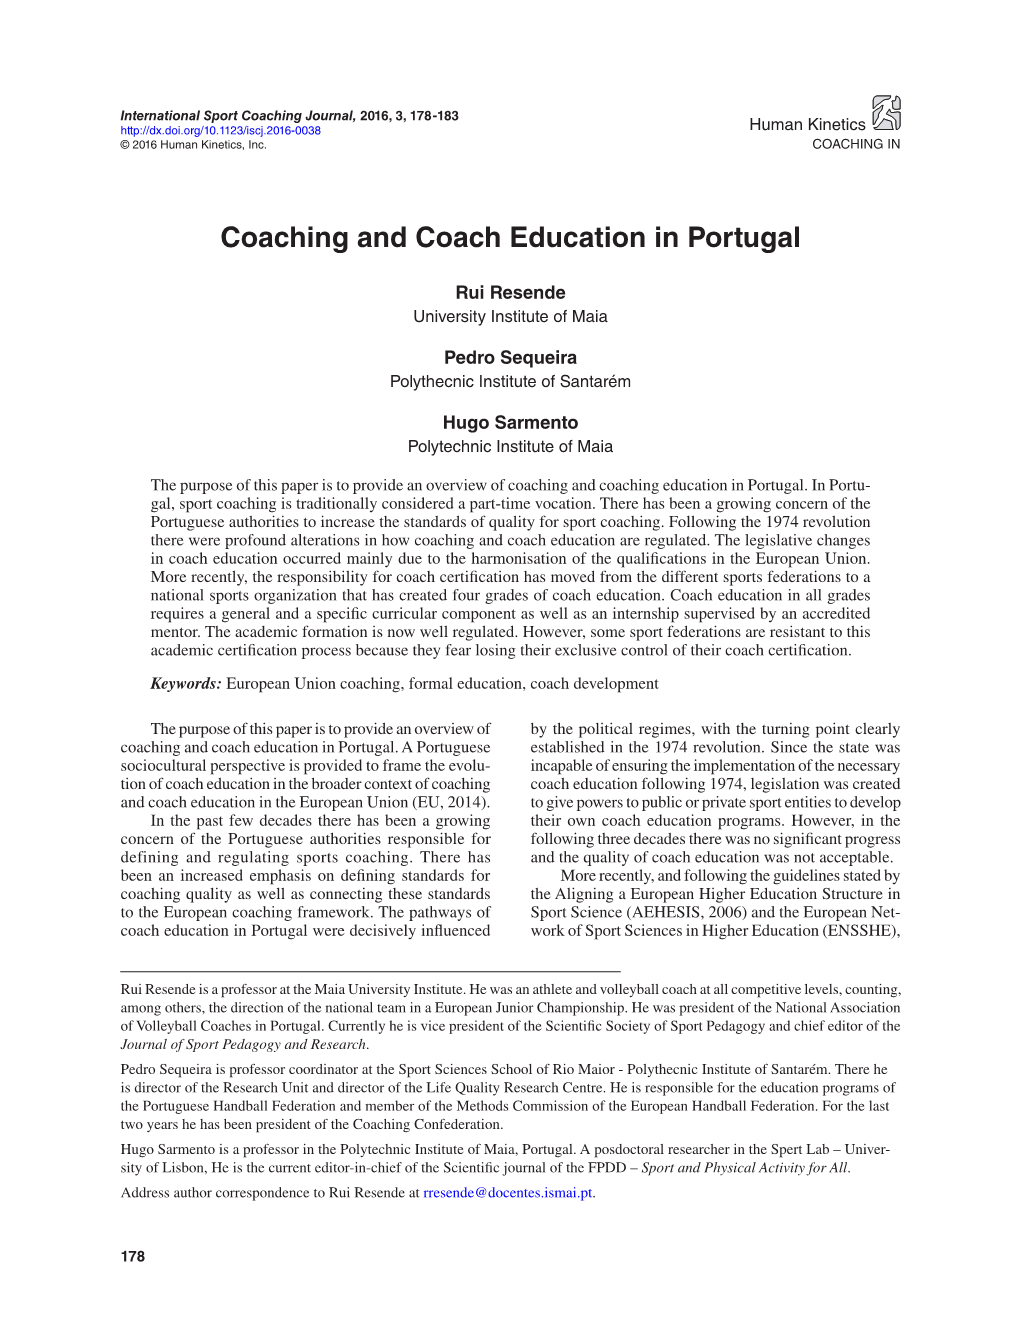 Coaching and Coach Education in Portugal